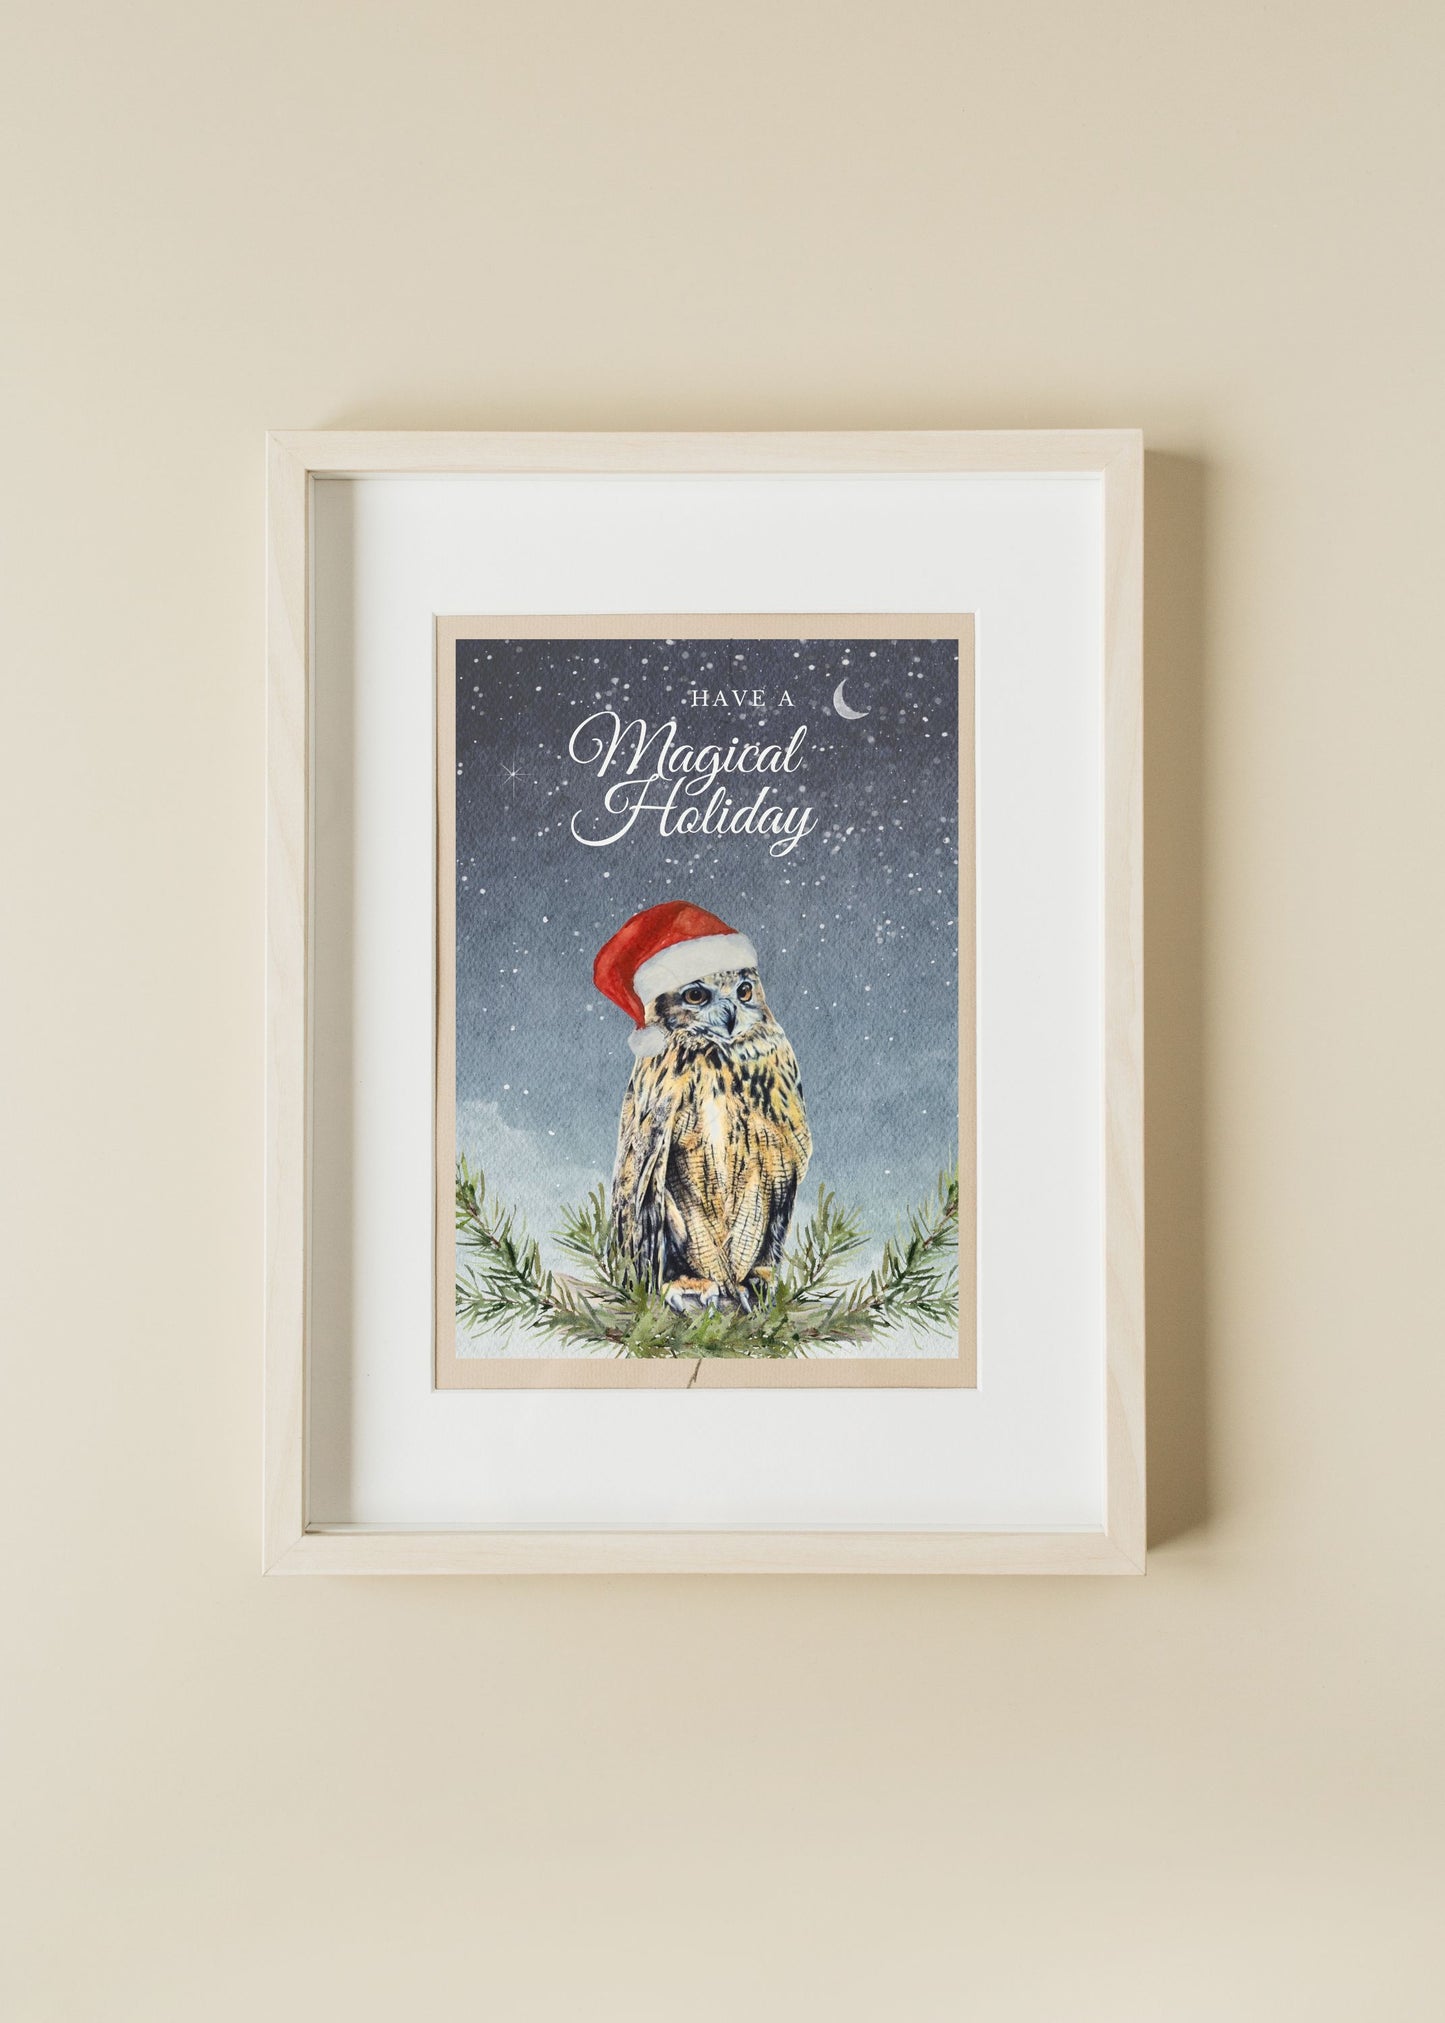 Have a Magical Holiday, Whimsical Owl Art, Art print on cardstock